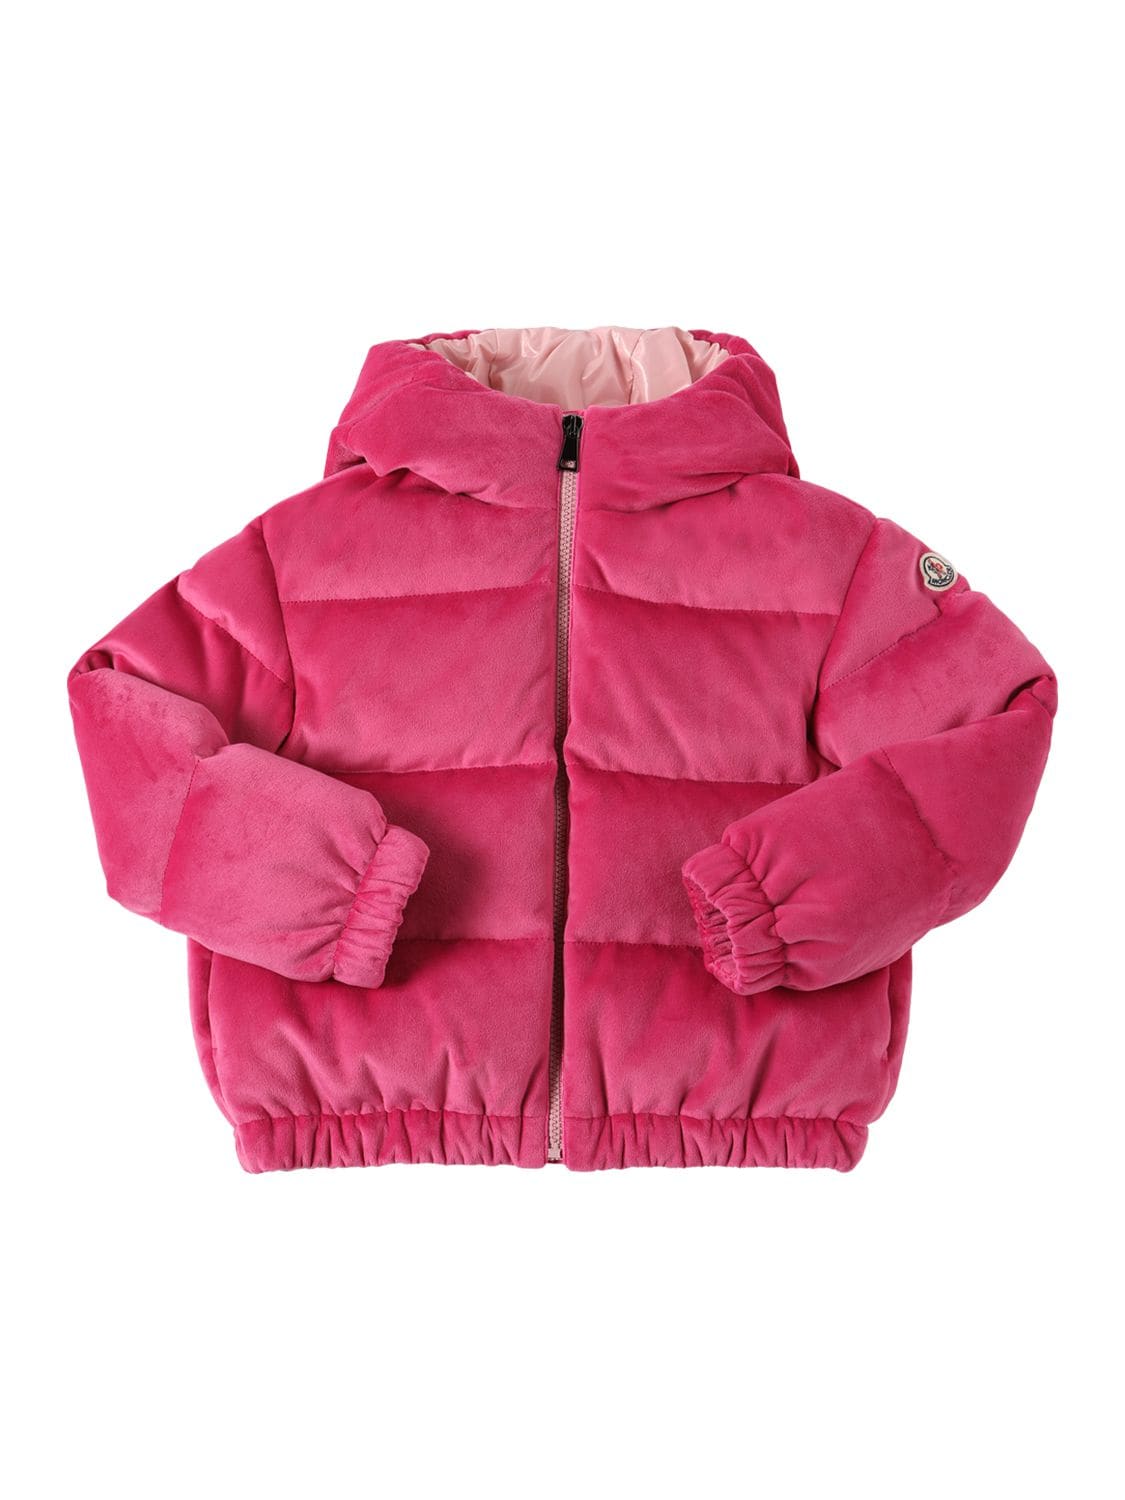 Image of Daos Nylon Chenille Down Jacket